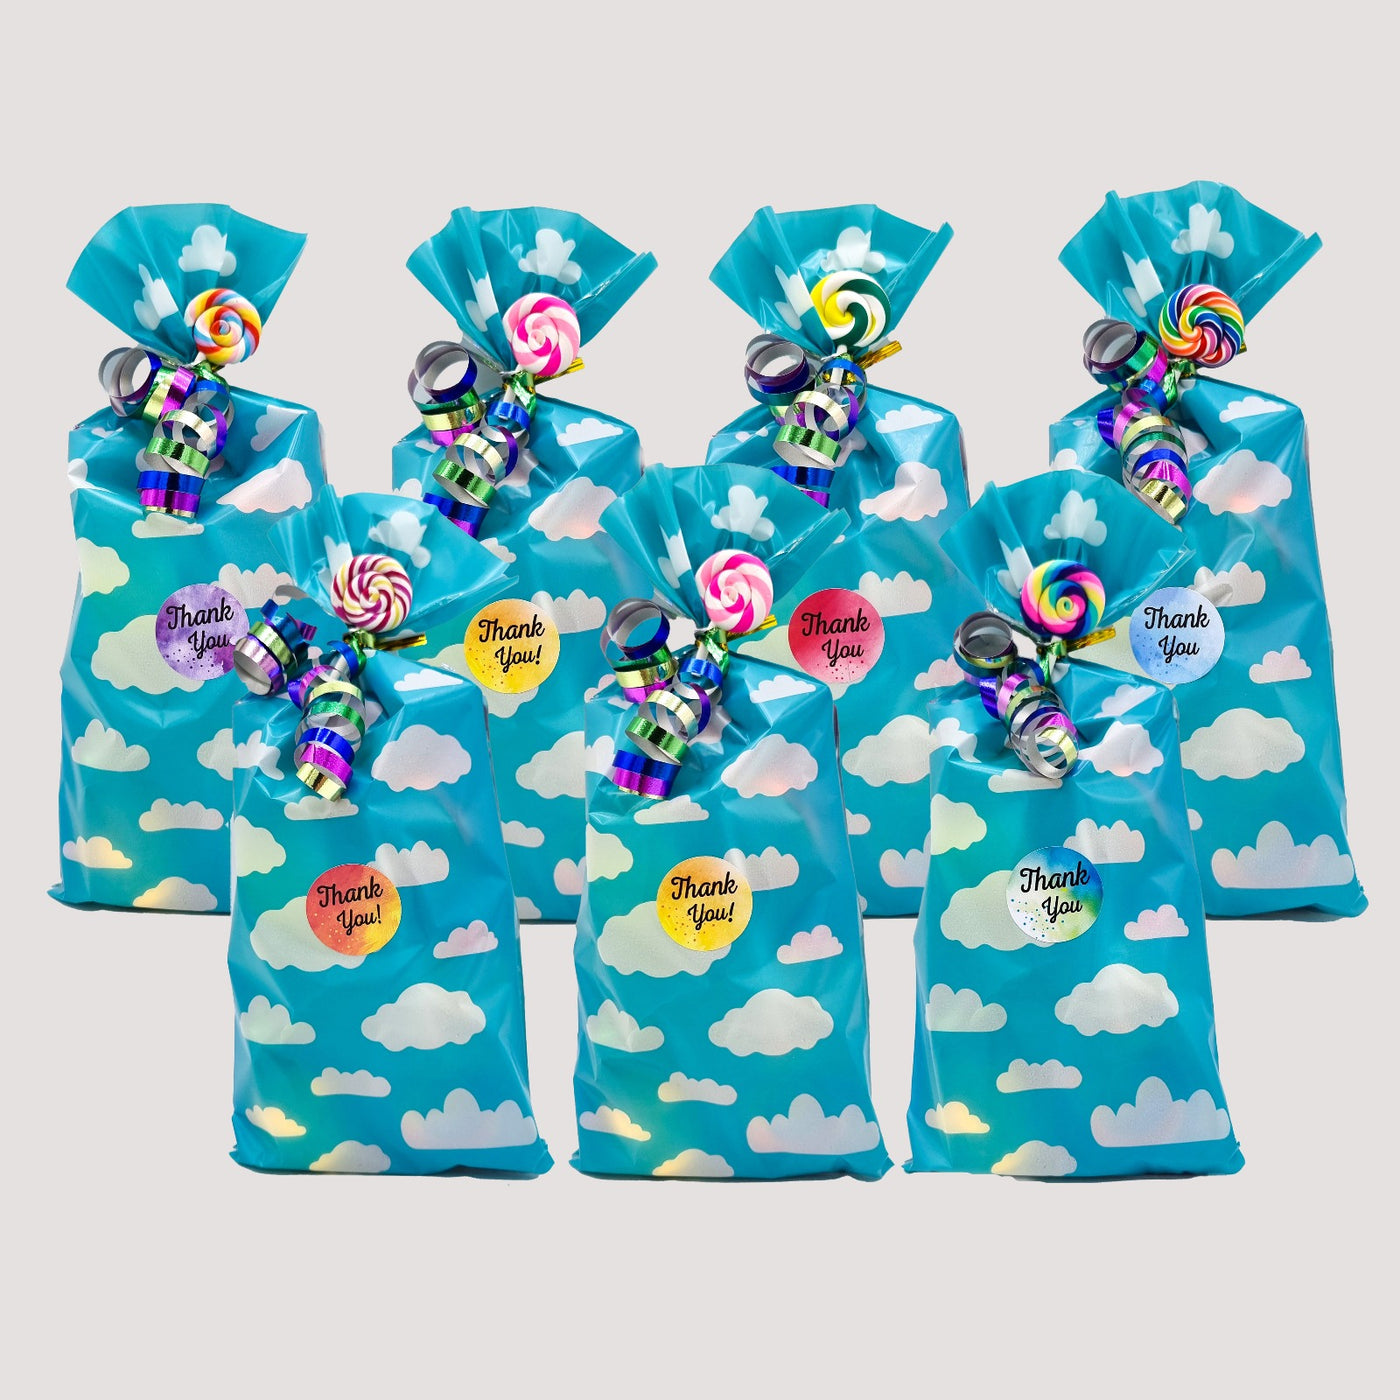 Pre Filled Kid's Colourful Clouds Rainbow Birthday Party Goody Bags With Toys And Sweets, Party Favours For Kids.